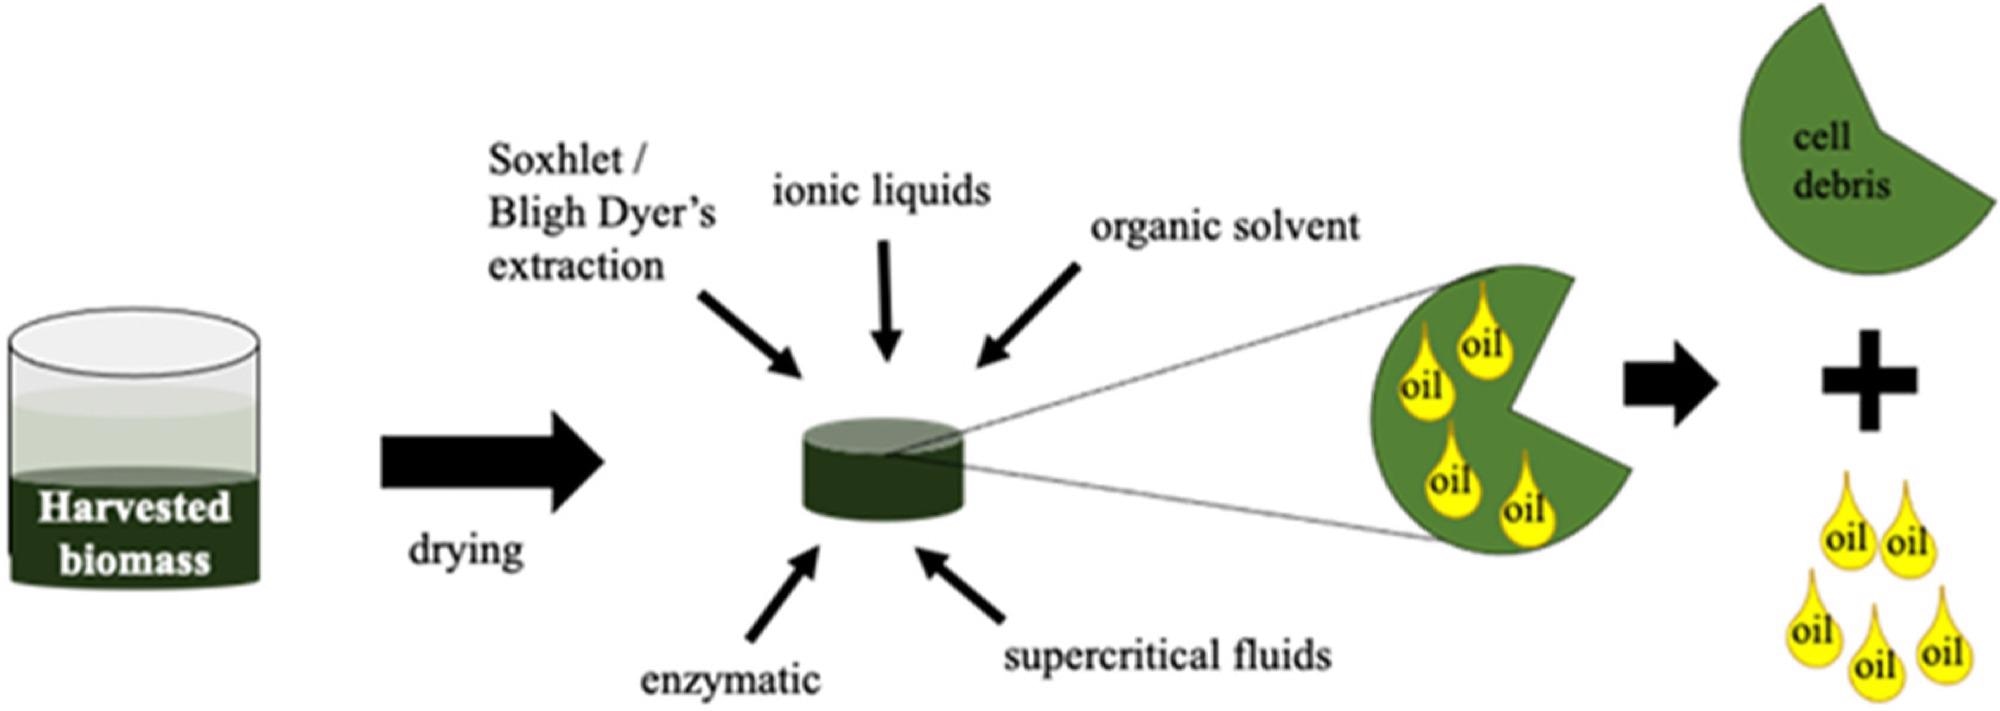 Schematic representation of oil extraction from microalgae biomass.